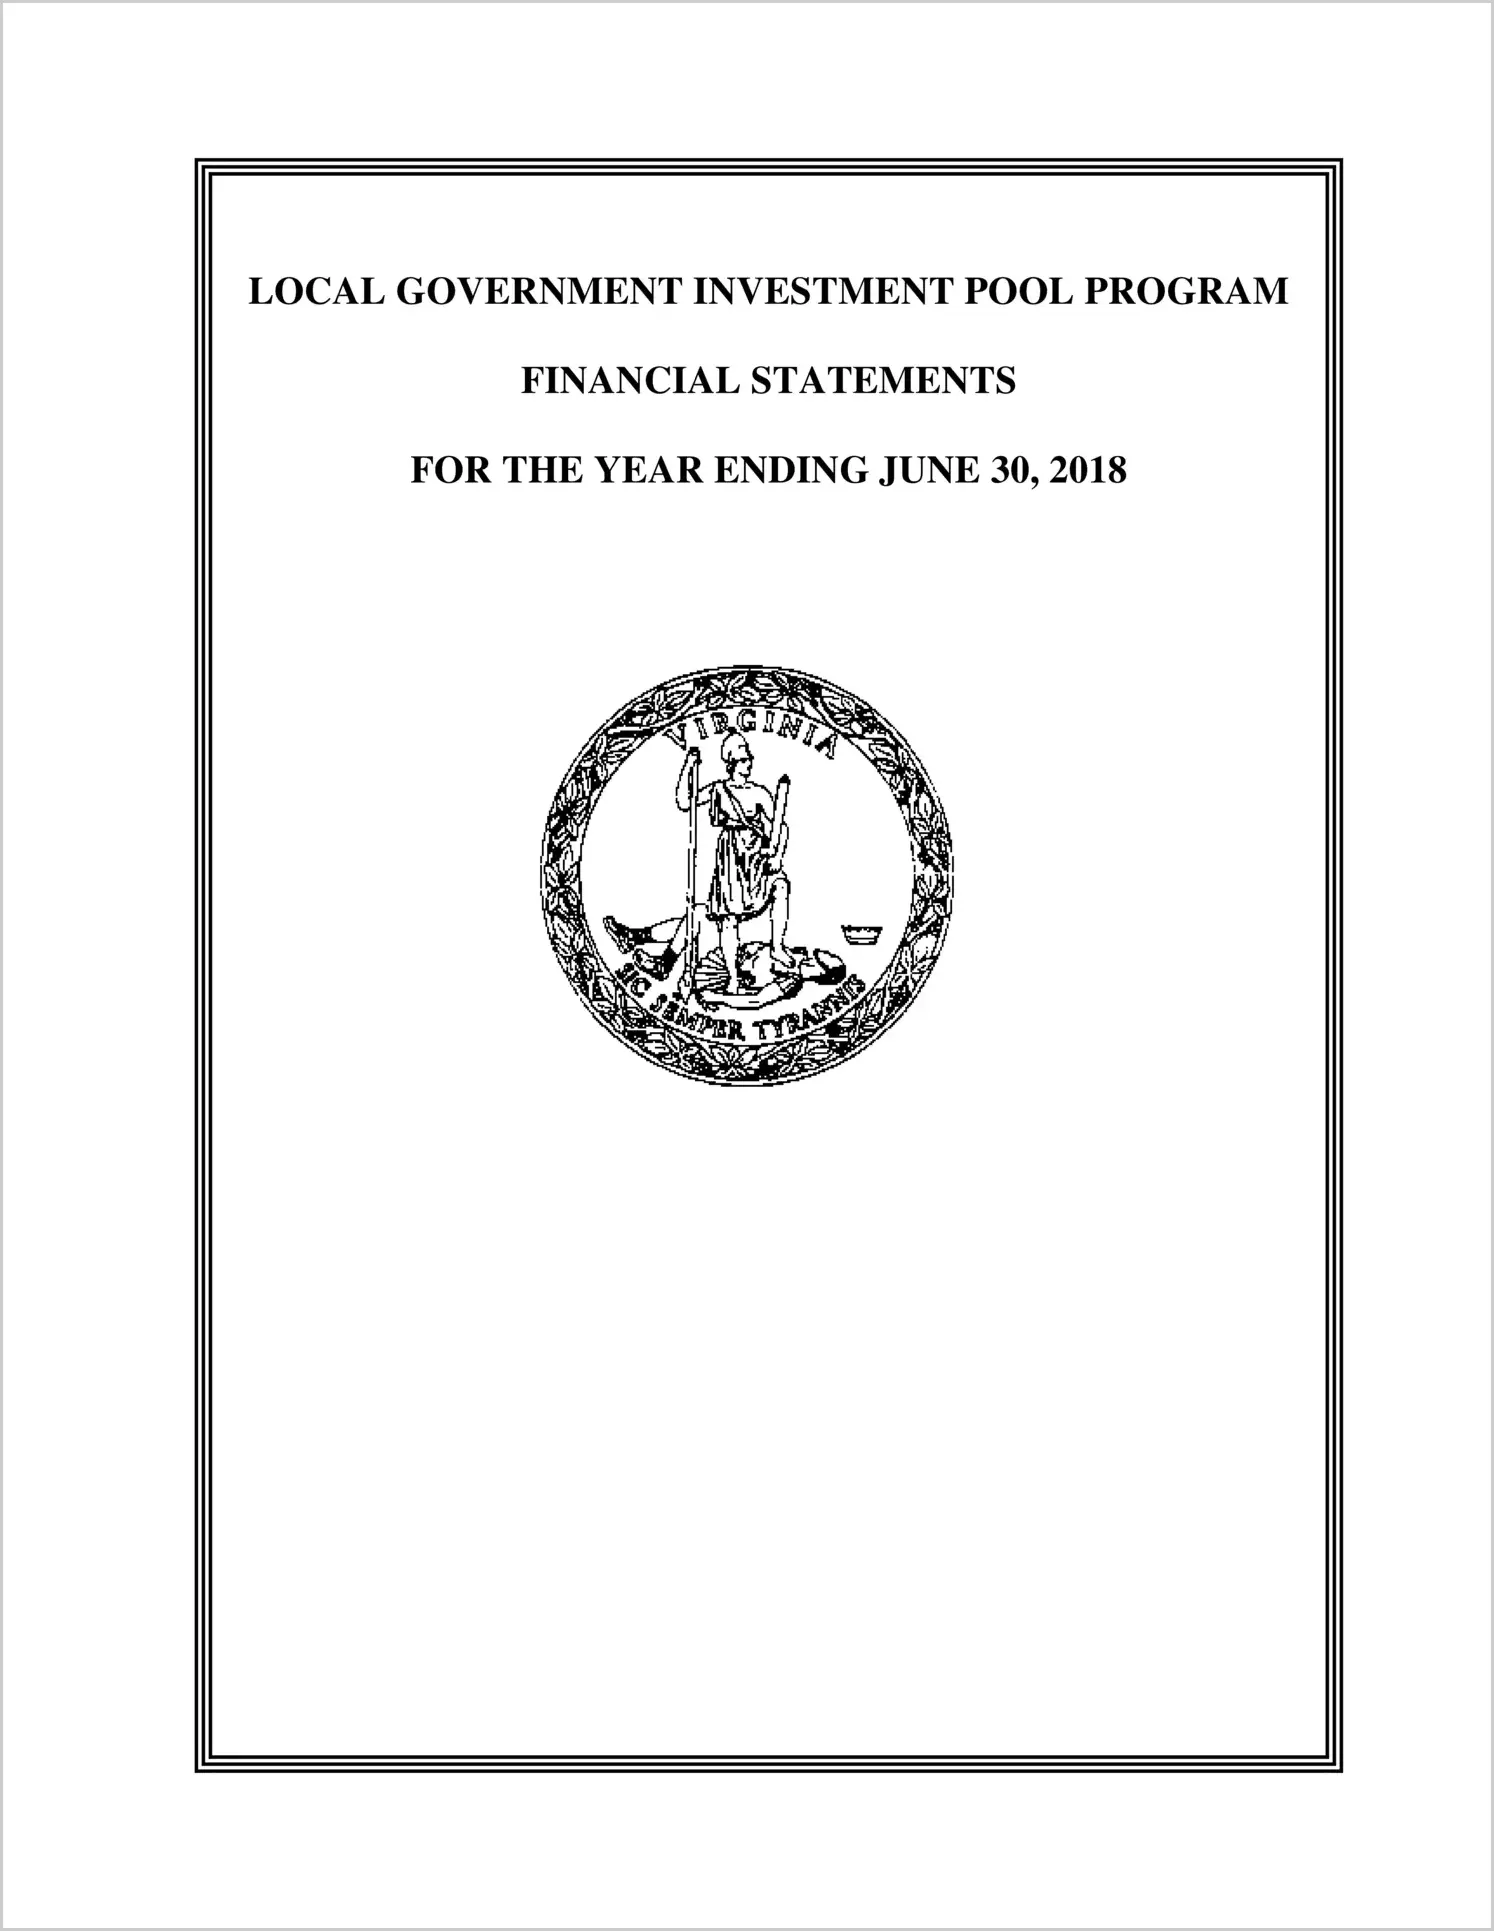 Local Government Investment Pool Financial Statements for the year ended June 30, 2018